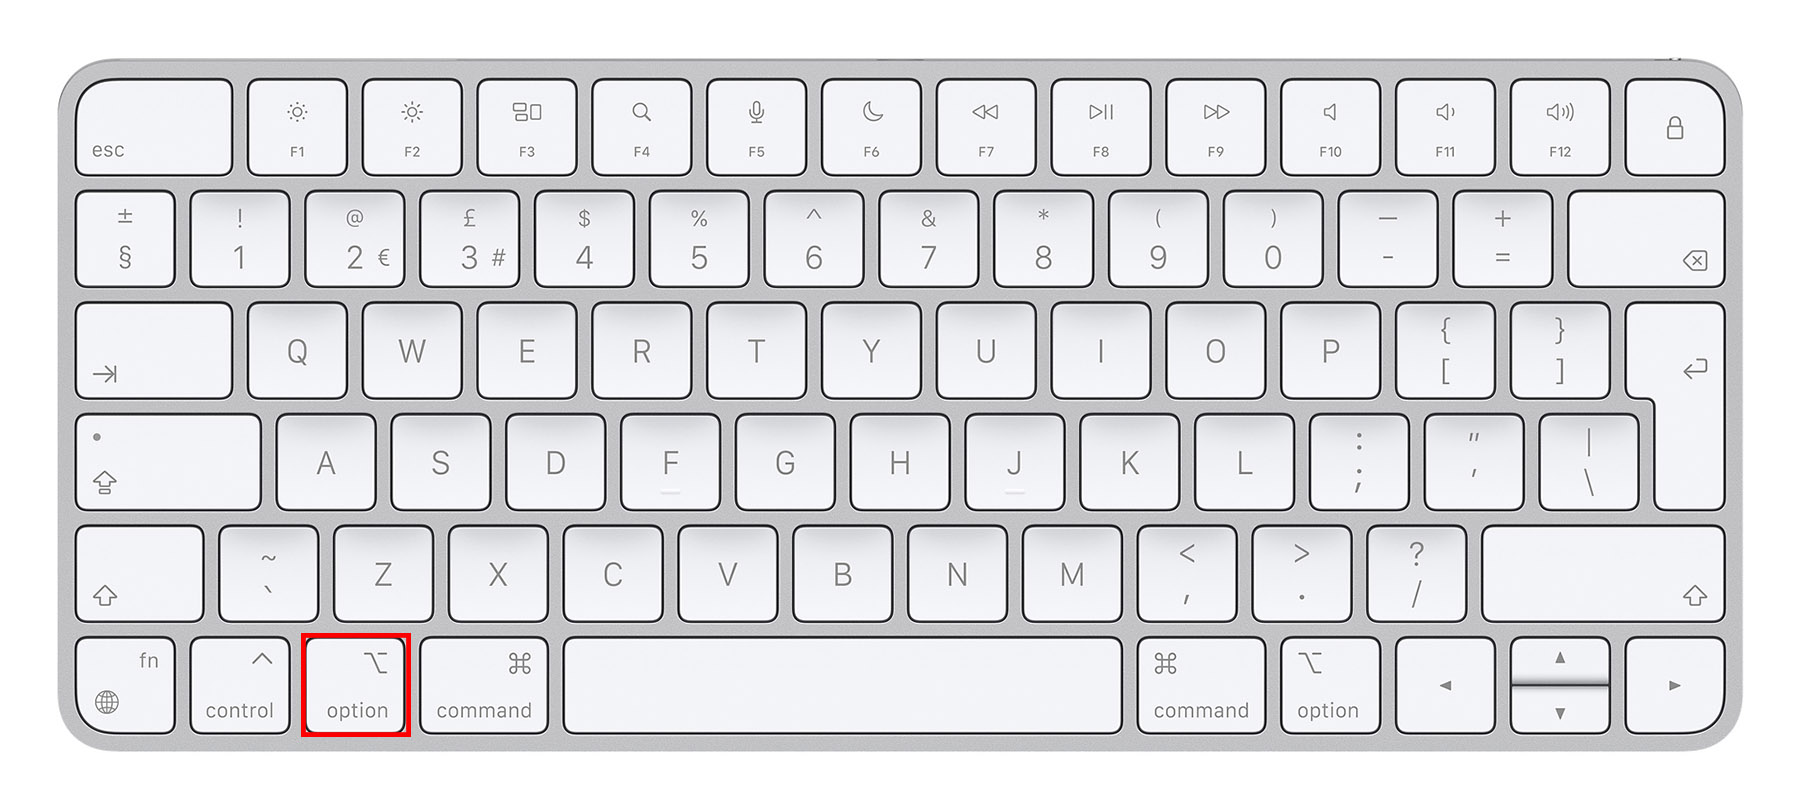 hold option key to put mac in recovery mode